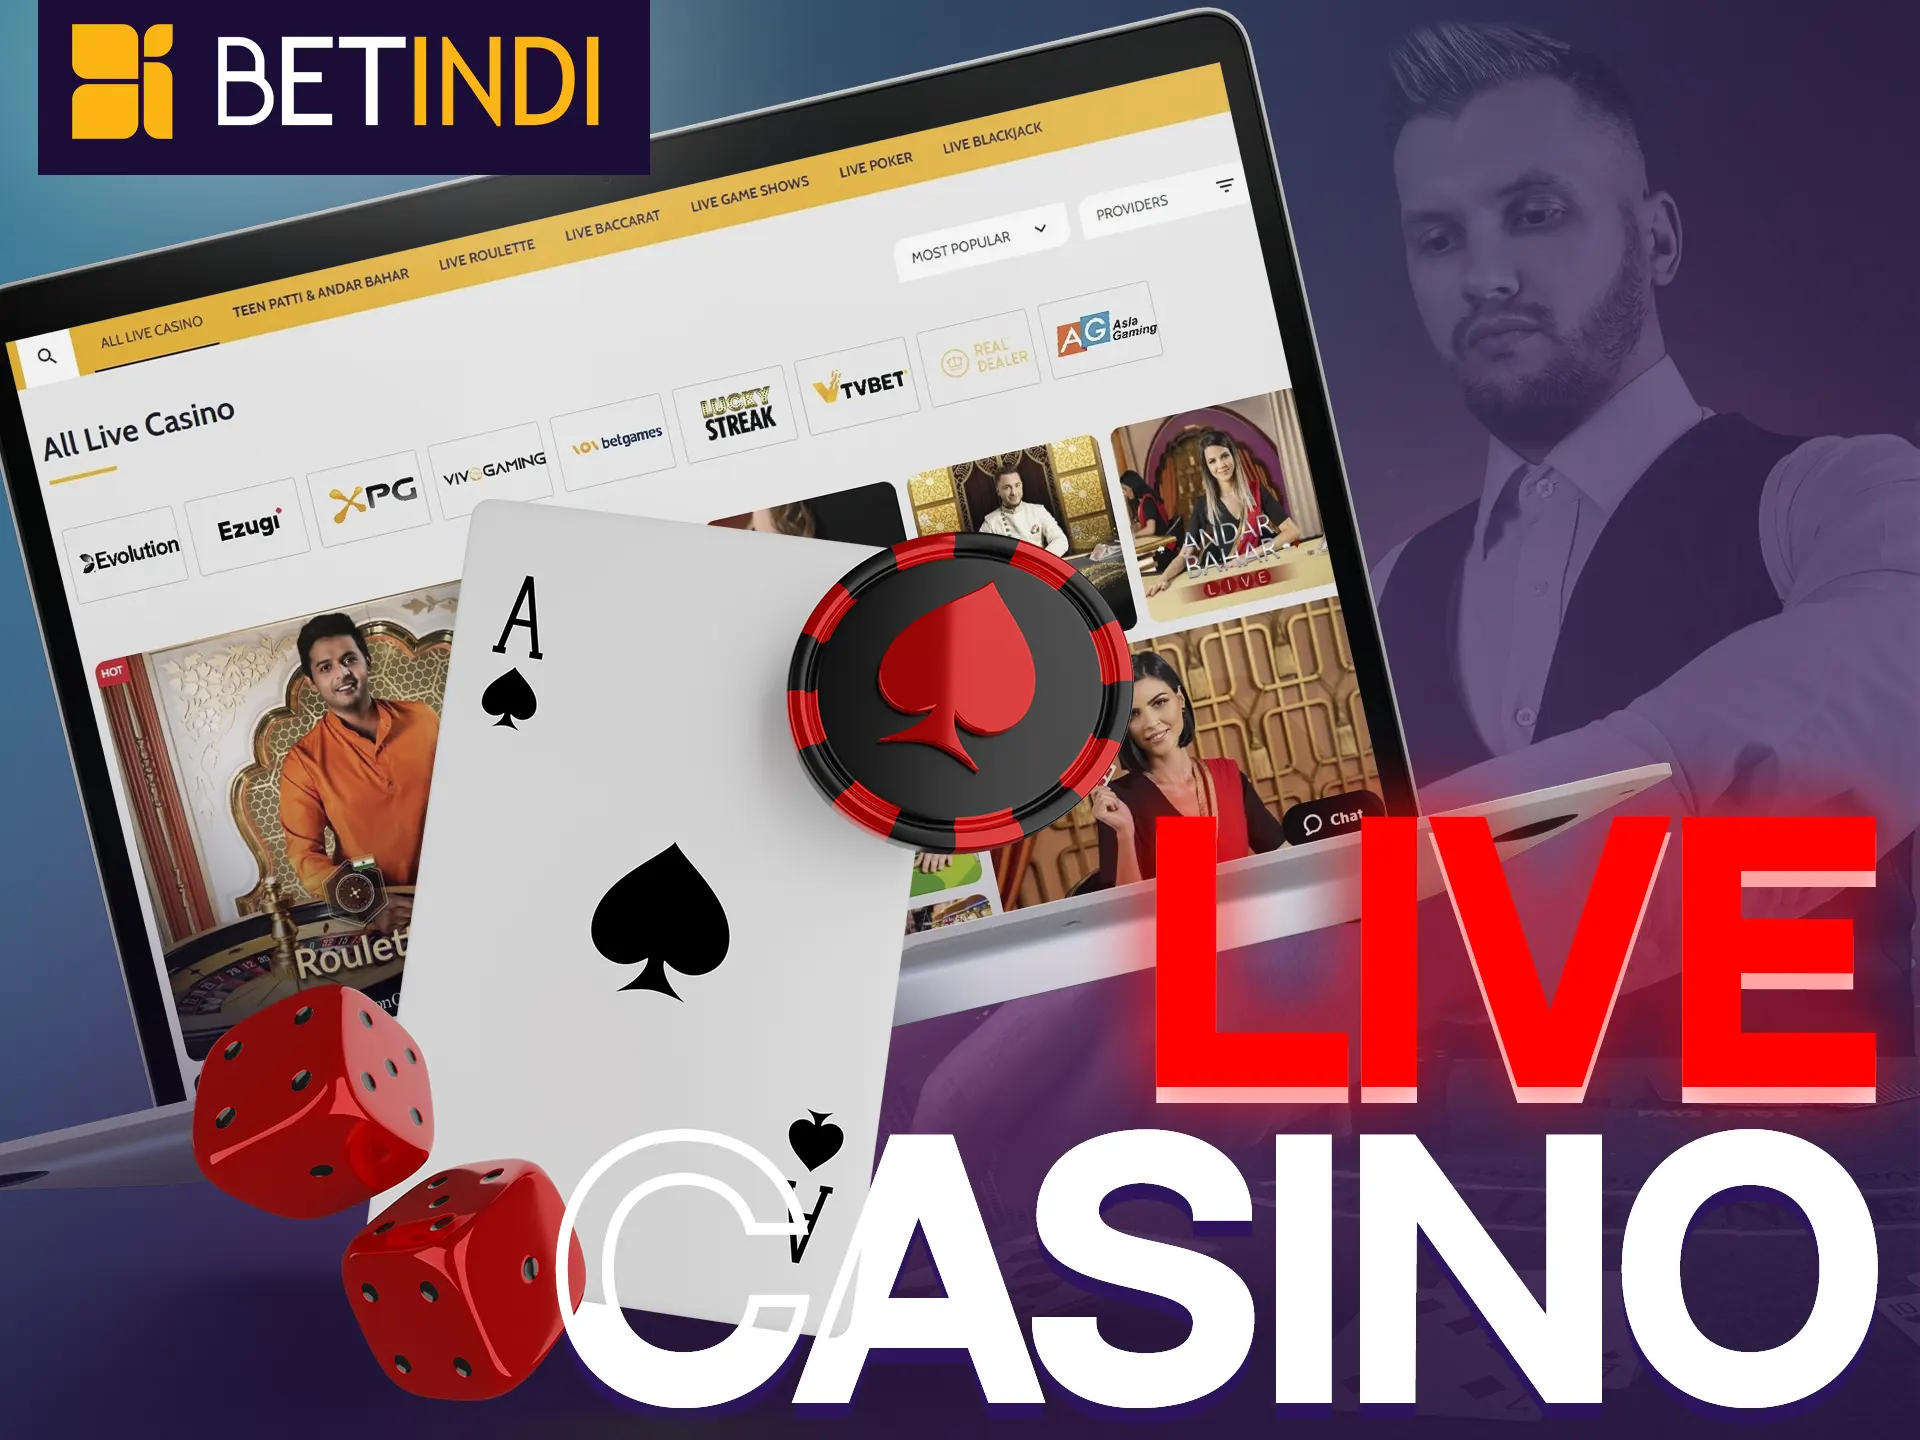 Experience realistic casino action with Betindi Live Casino.